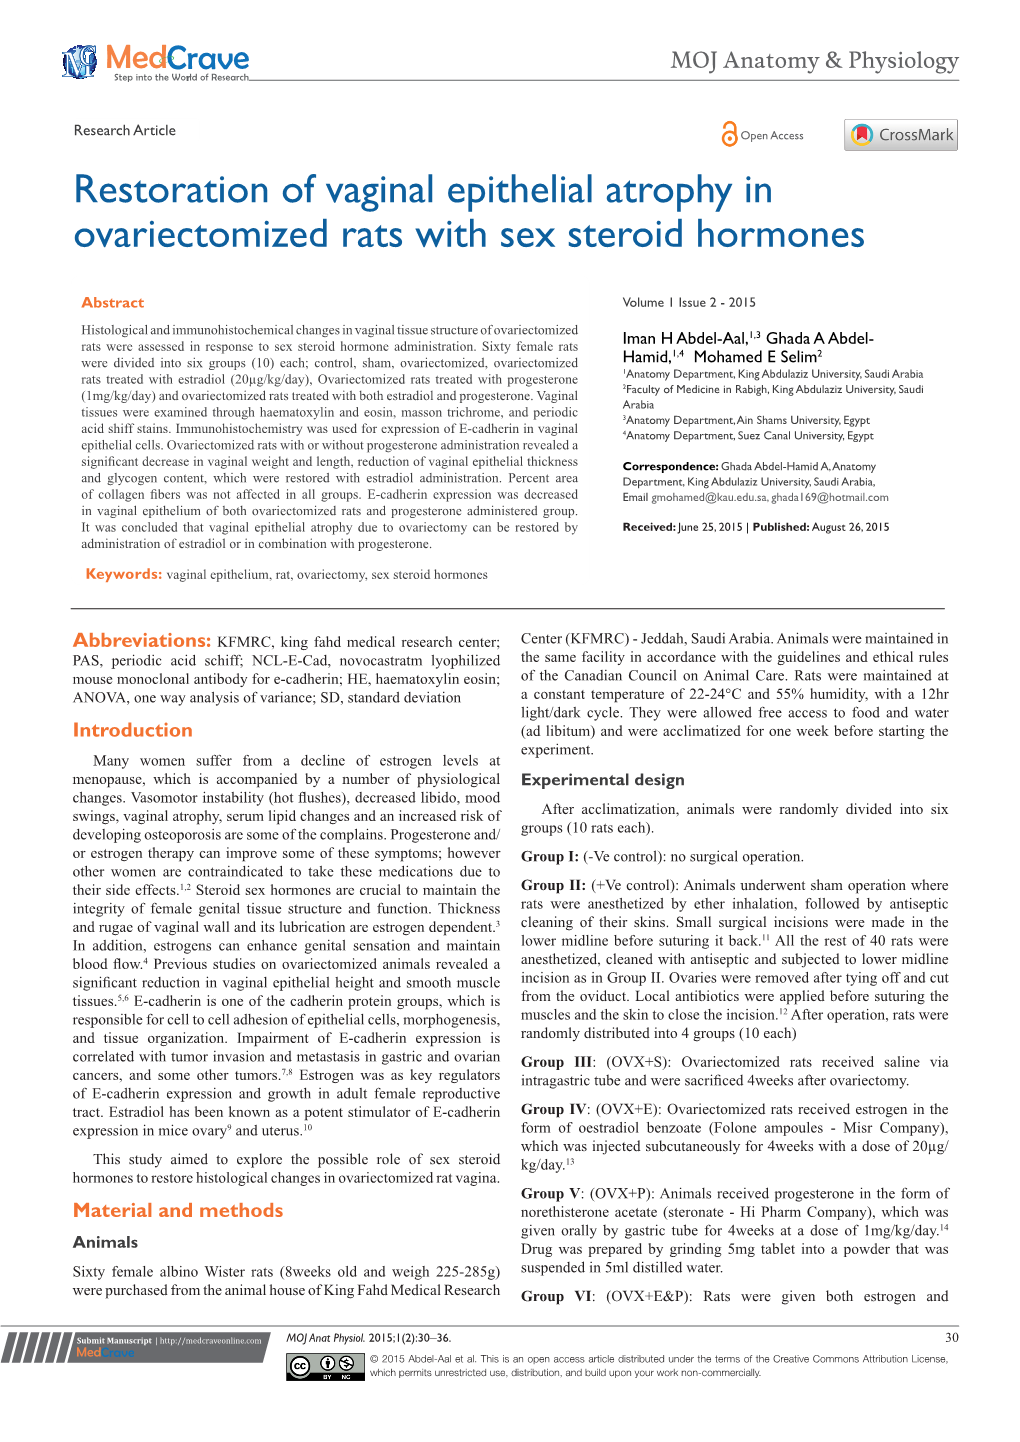 Restoration of Vaginal Epithelial Atrophy in Ovariectomized Rats with Sex Steroid Hormones